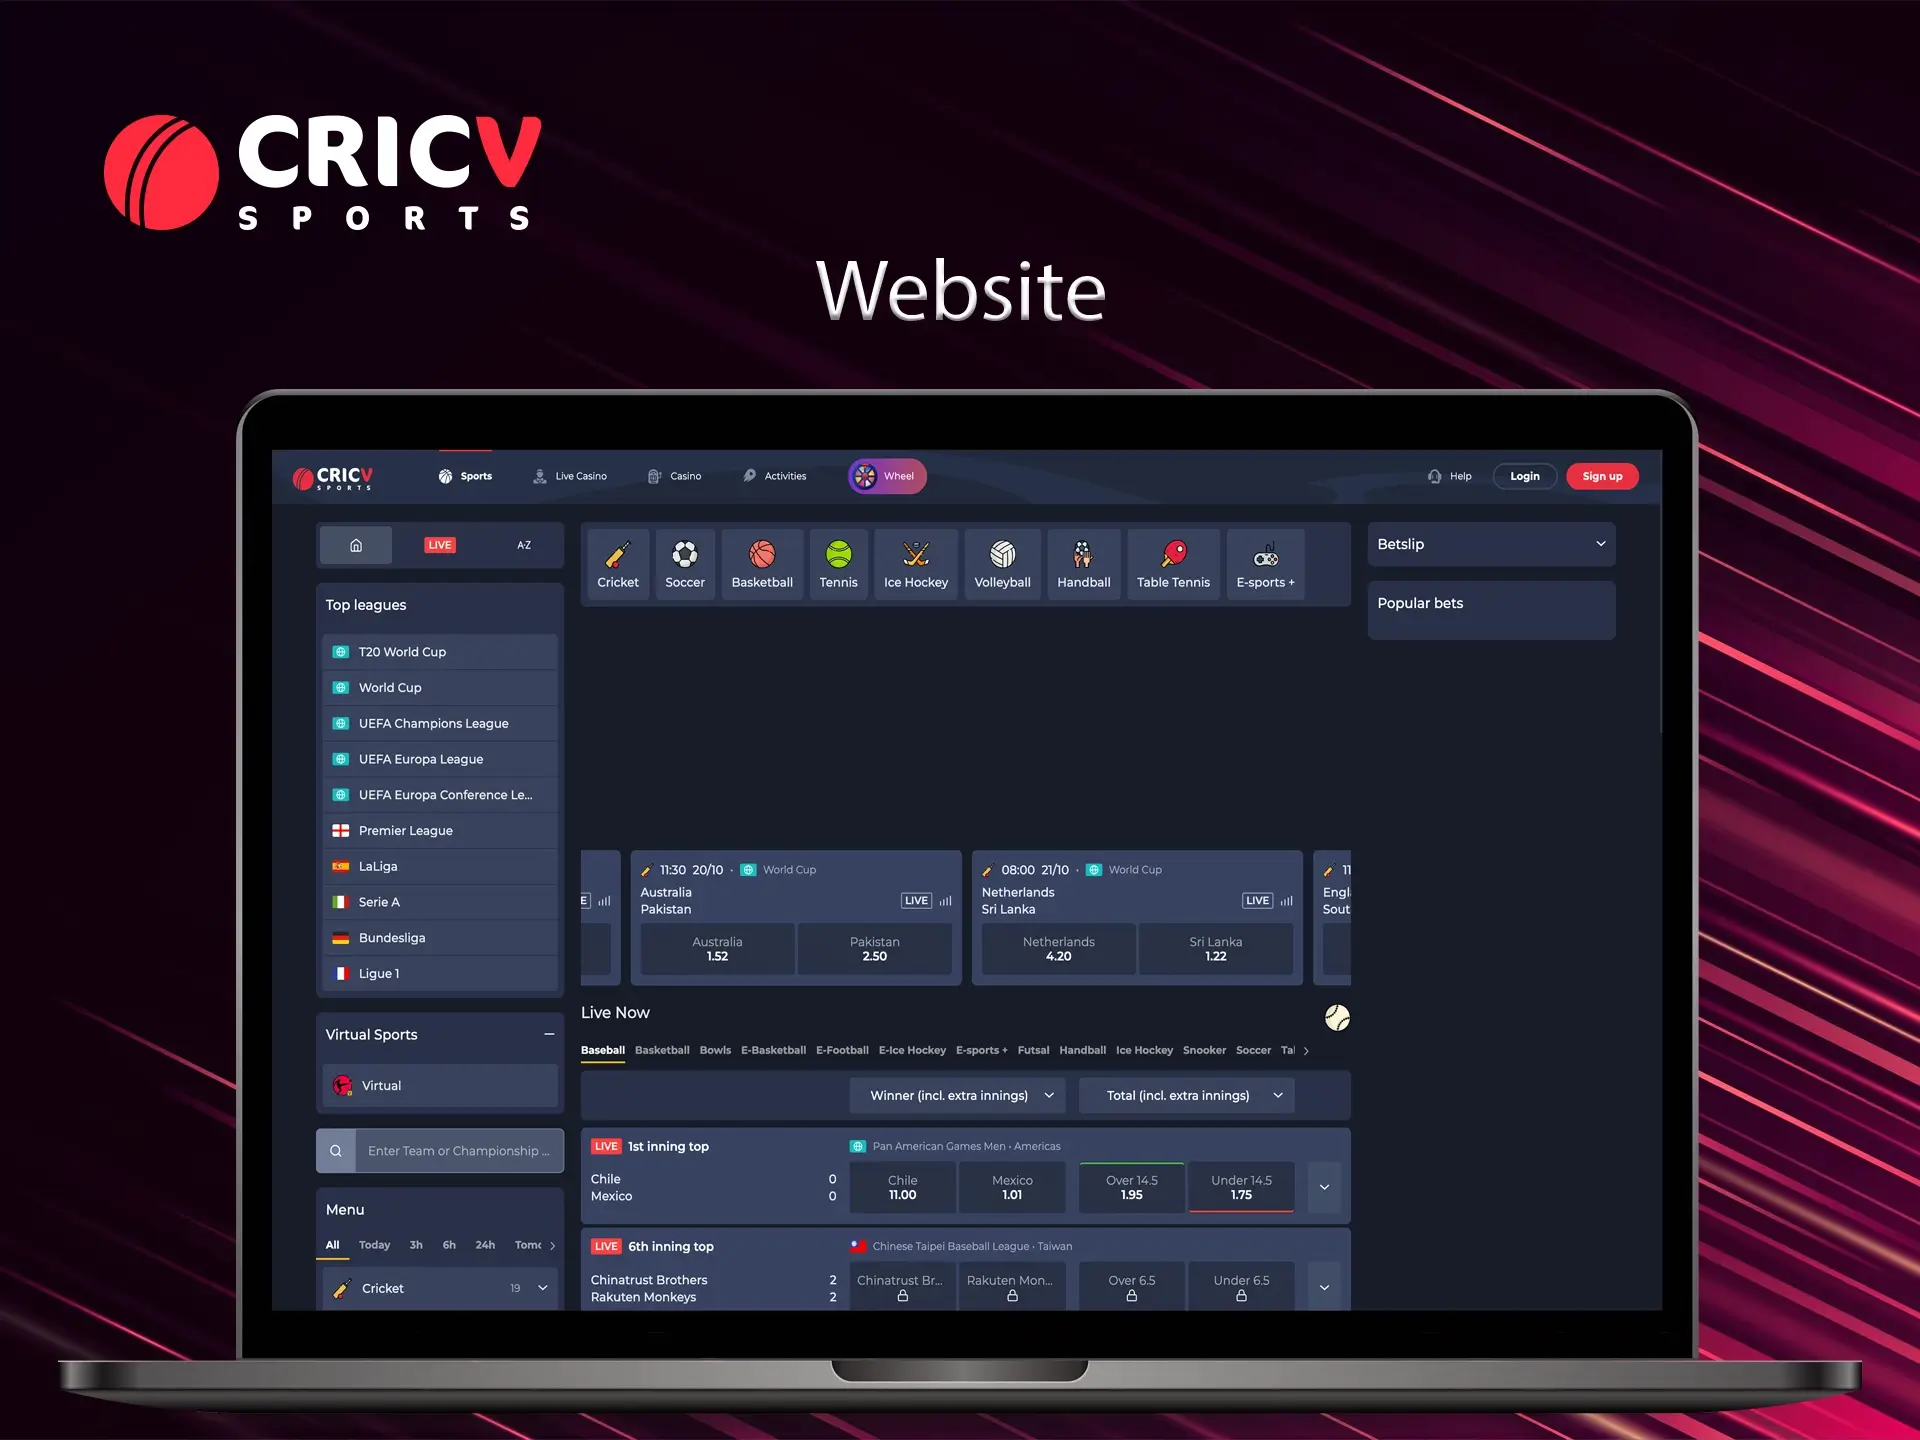 The official Cricv website has been running for a long time and has proven to be stable and confident for users.